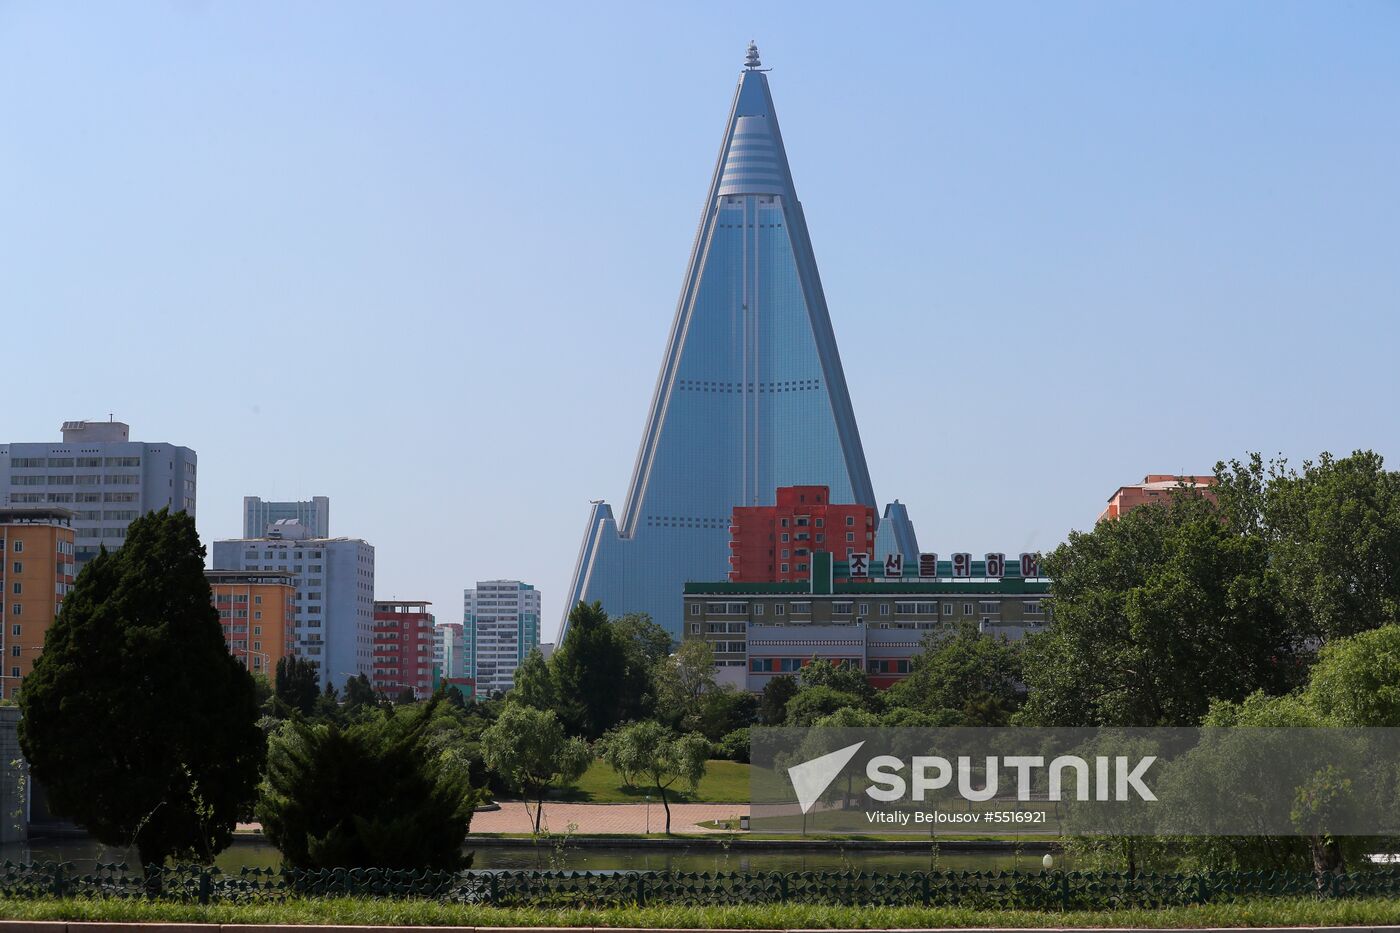 Cities of the world. Pyongyang